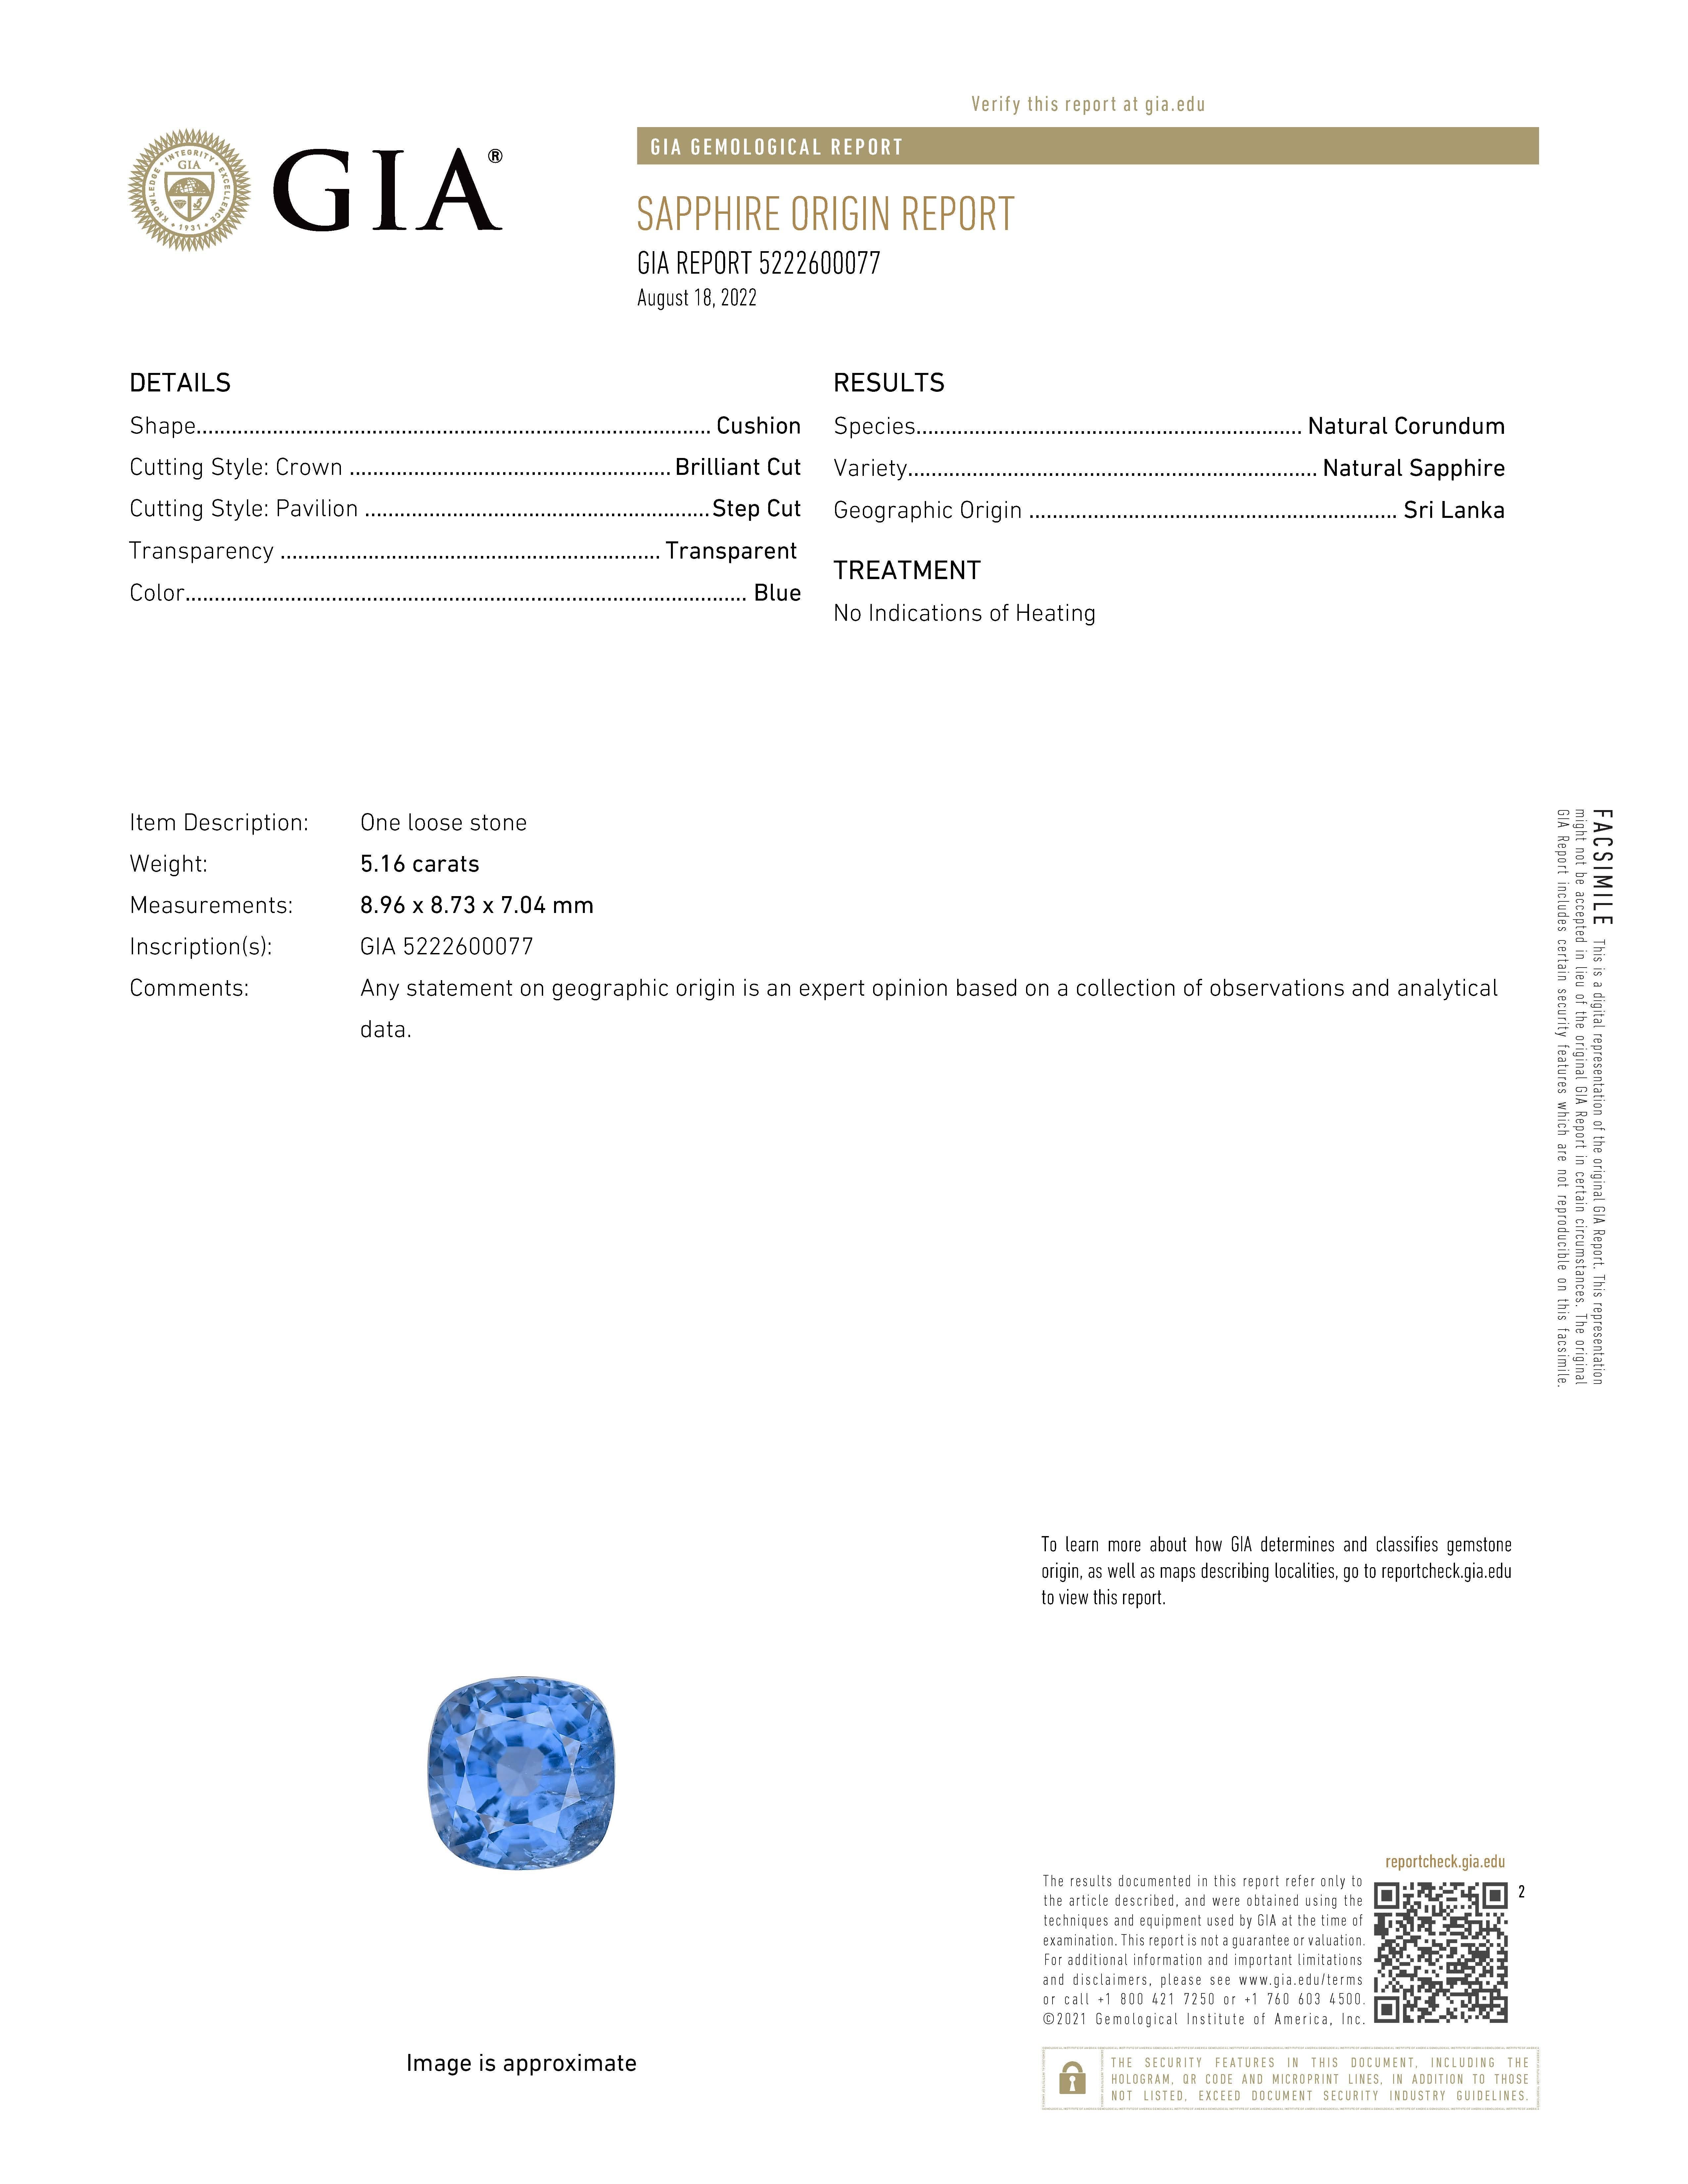 Cushion Cut GIA Certified 5.16 Carat Ceylon Blue Sapphire Ring with Diamonds in 18k Gold For Sale